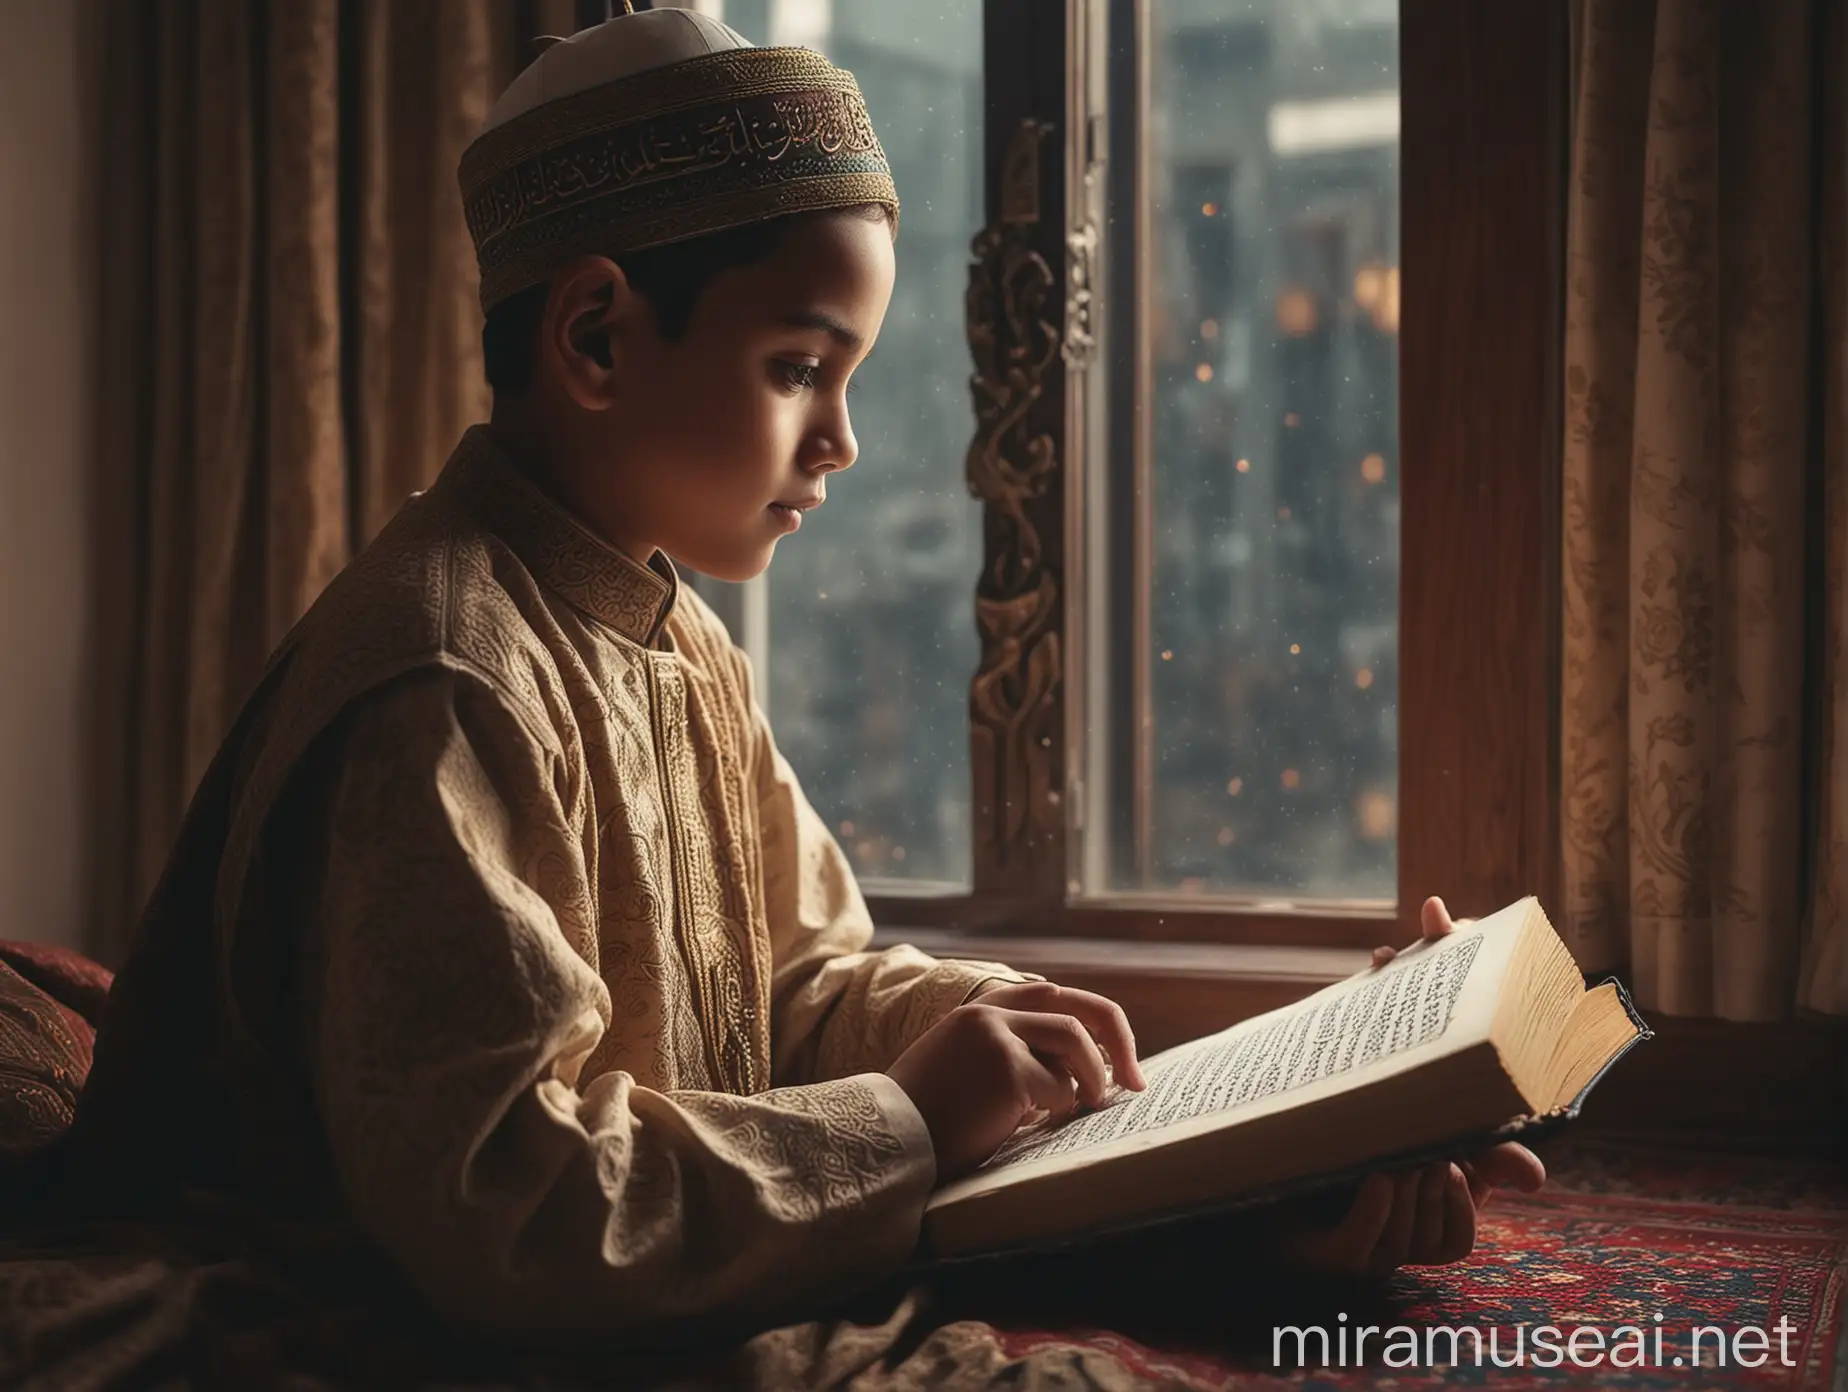 Muslim Child Reading Quran by Window Cinematic Photography with Stunning Detail